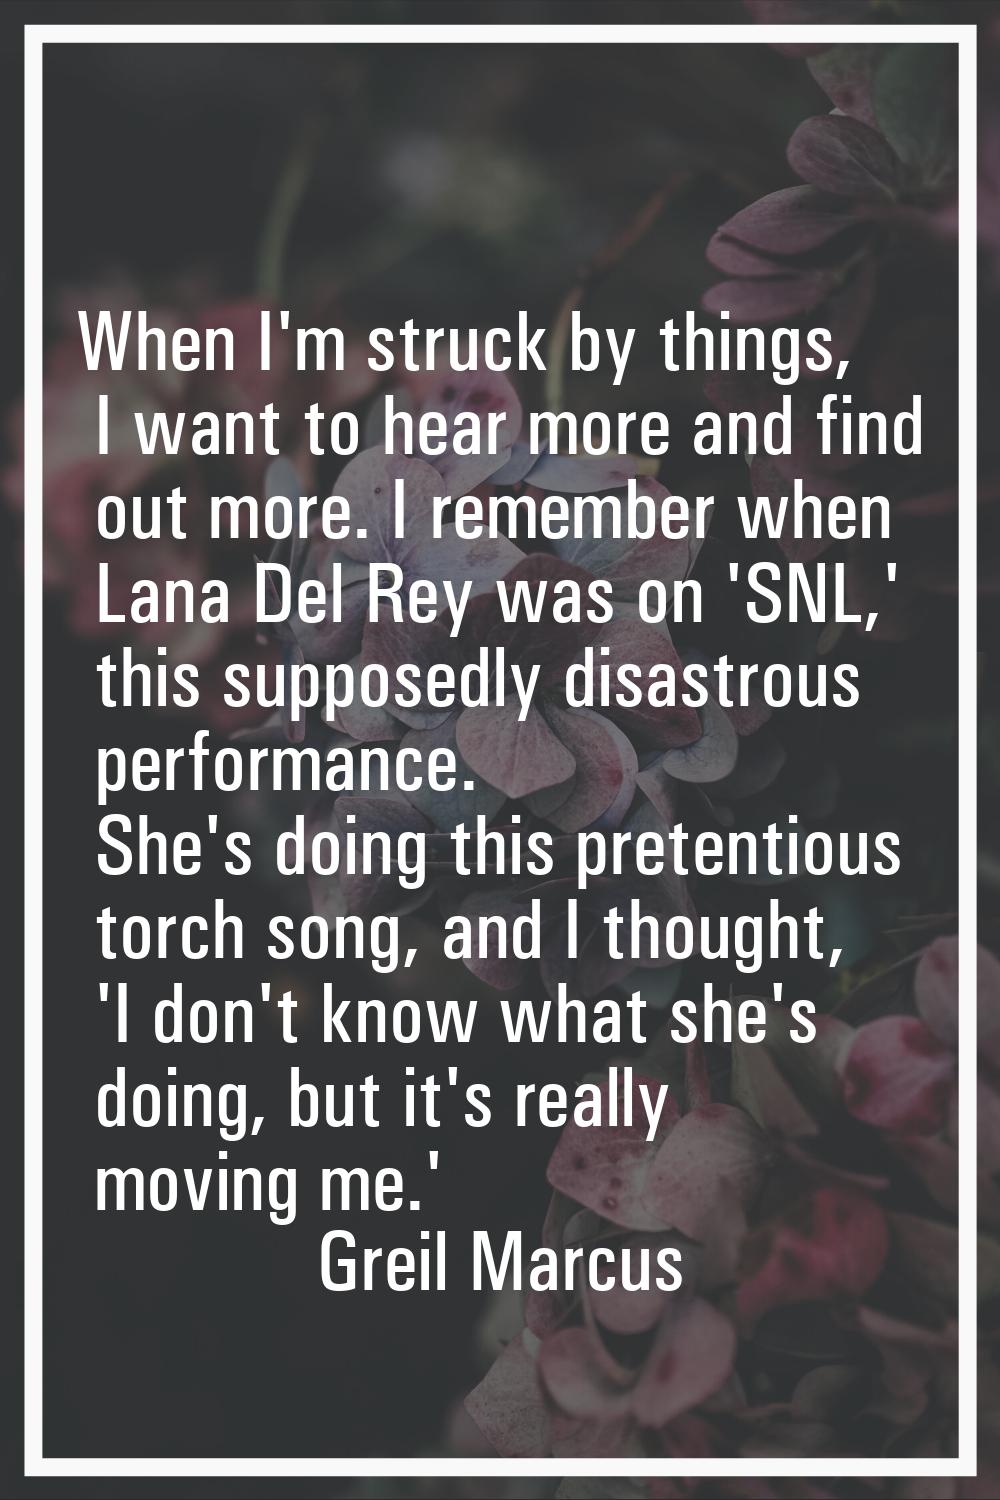 When I'm struck by things, I want to hear more and find out more. I remember when Lana Del Rey was 